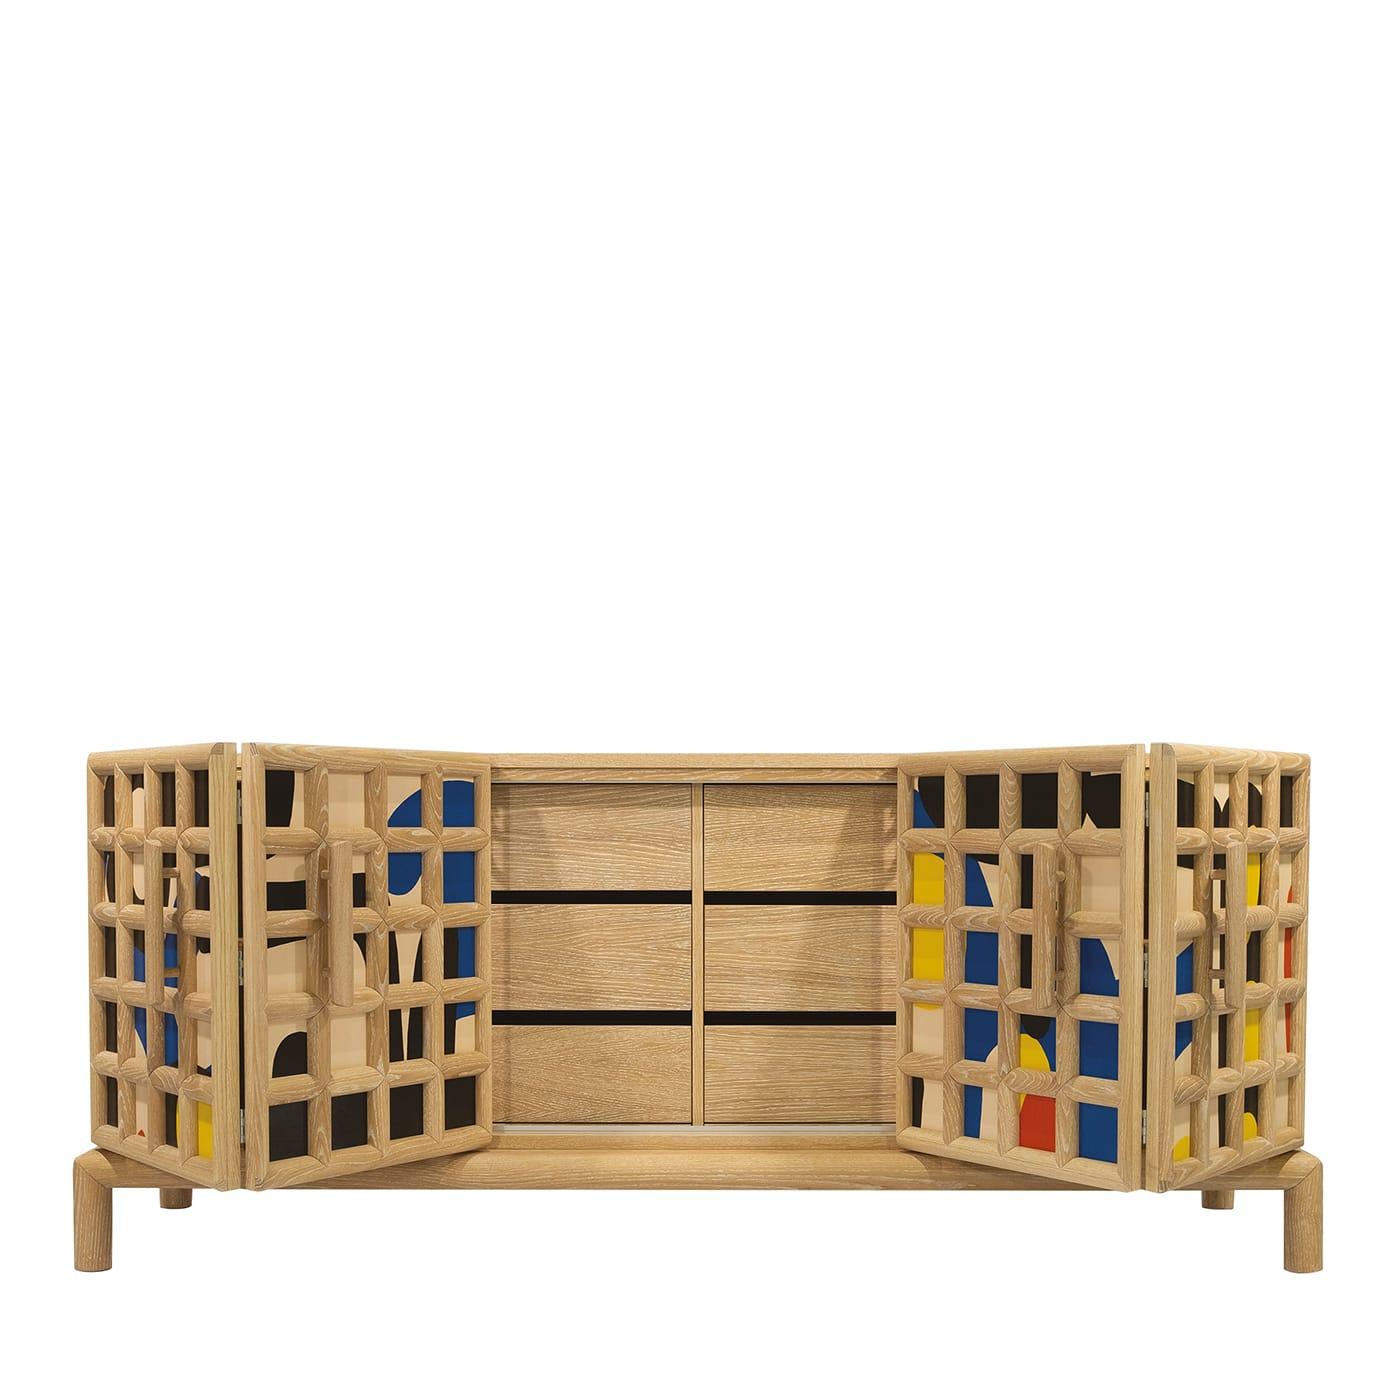 The Ribera sideboard uses traditional painting techniques, combined with highly sophisticated joinery to create an unexpected and surprising piece of furniture. Pickled oak is grafted in the form of a grid adapted for use as handles. The bi-fold